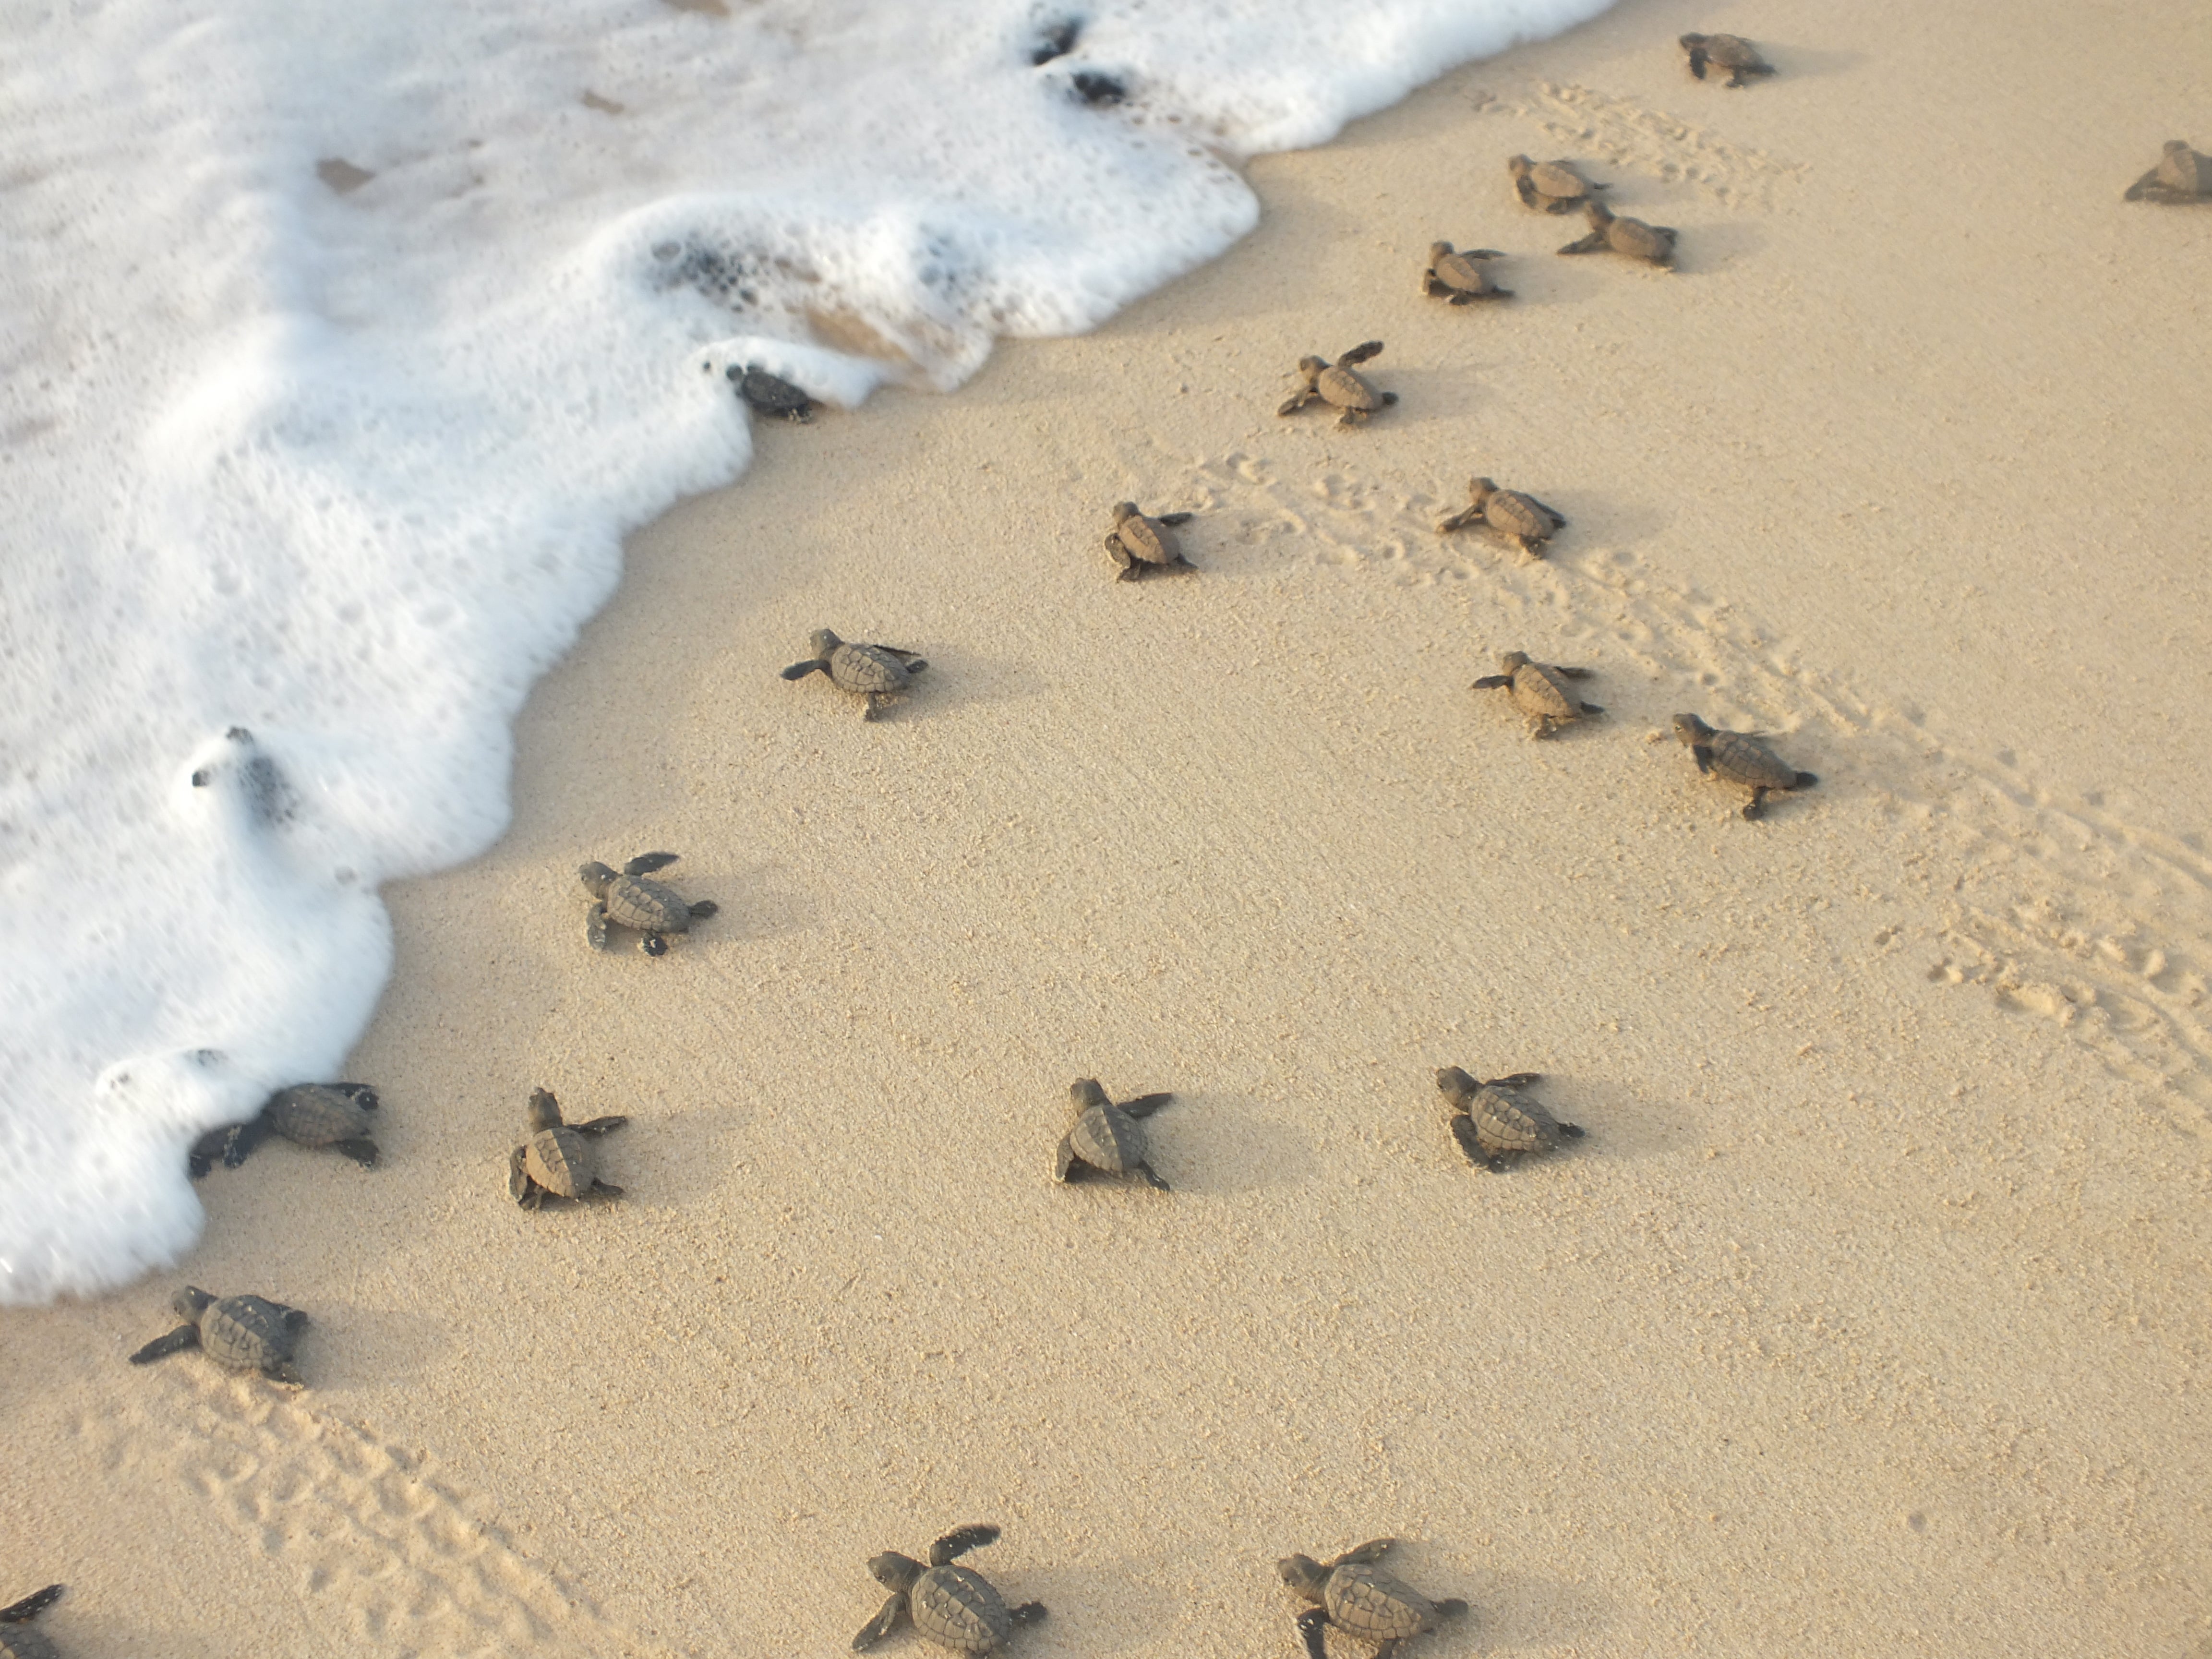 Global heating could harm the survival of loggerhead sea turtle hatchlings - The Independent